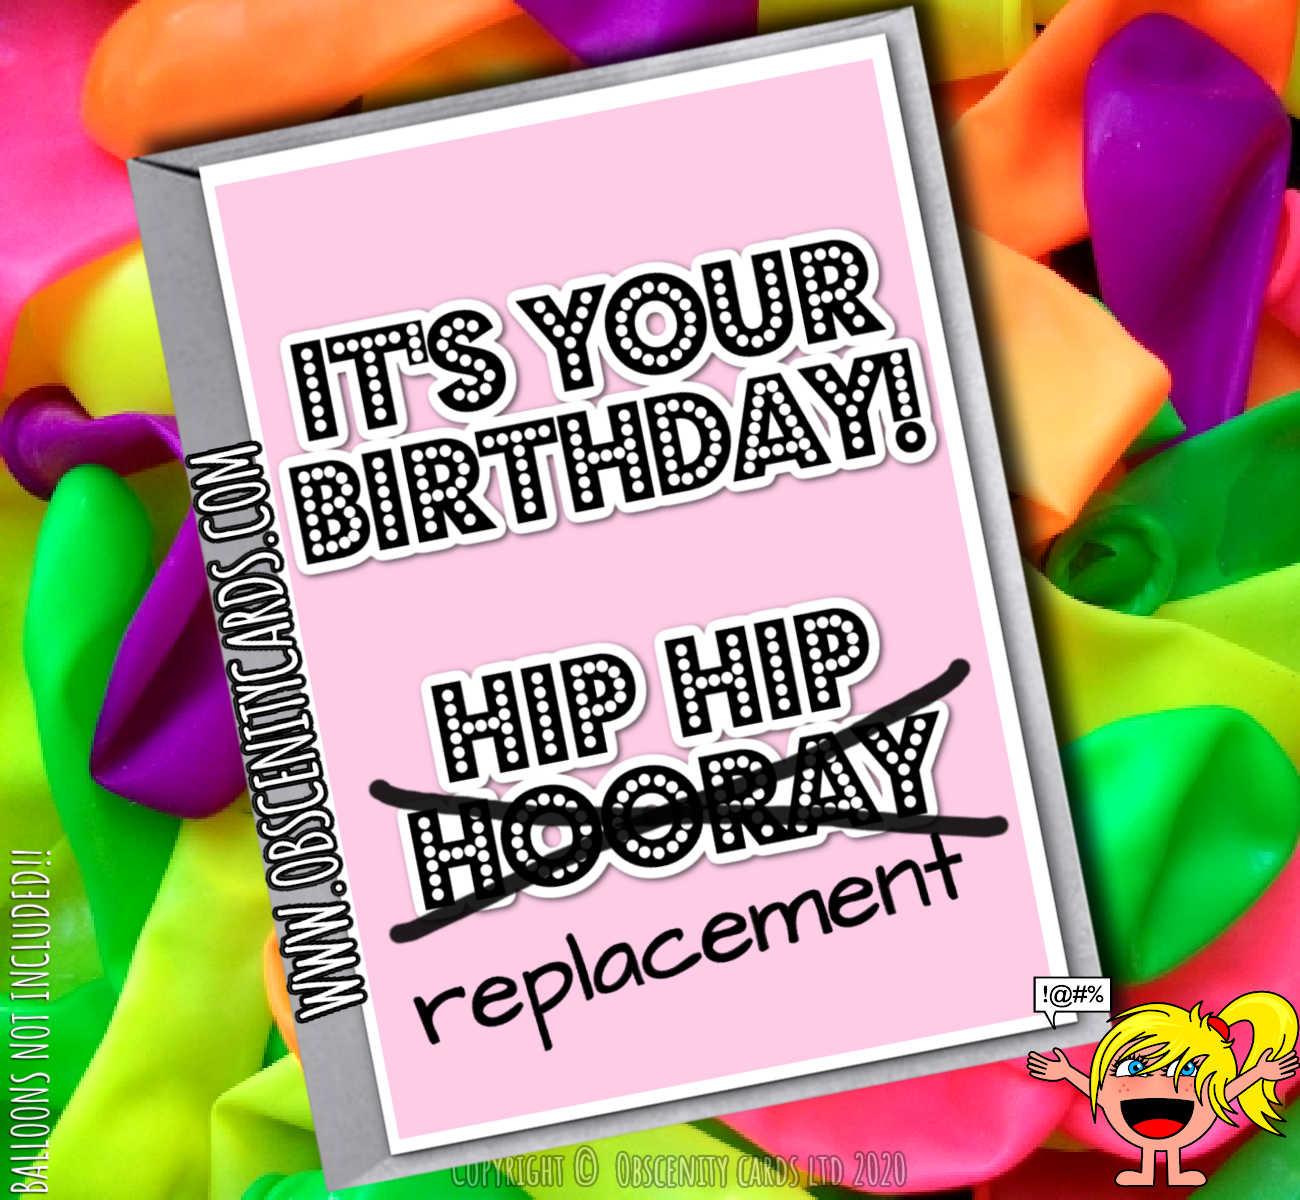 HAPPY BIRTHDAY HIP HIP HIP REPLACEMENT CARD